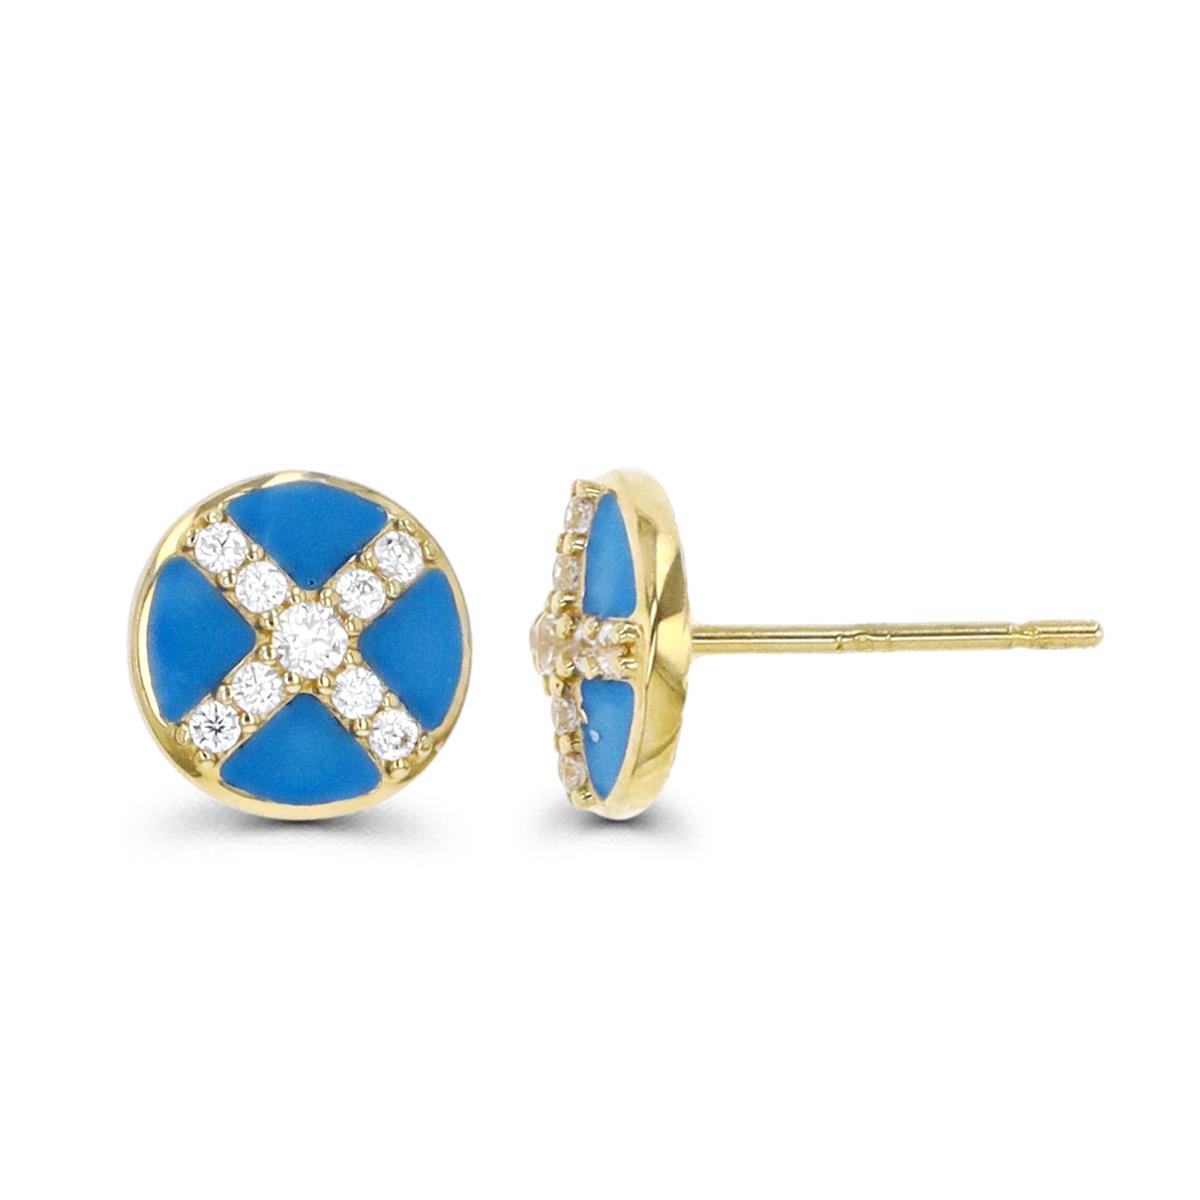 14K Gold Yellow & White CZ and Ligt Blue Enamel 7.0MM Stud Earring